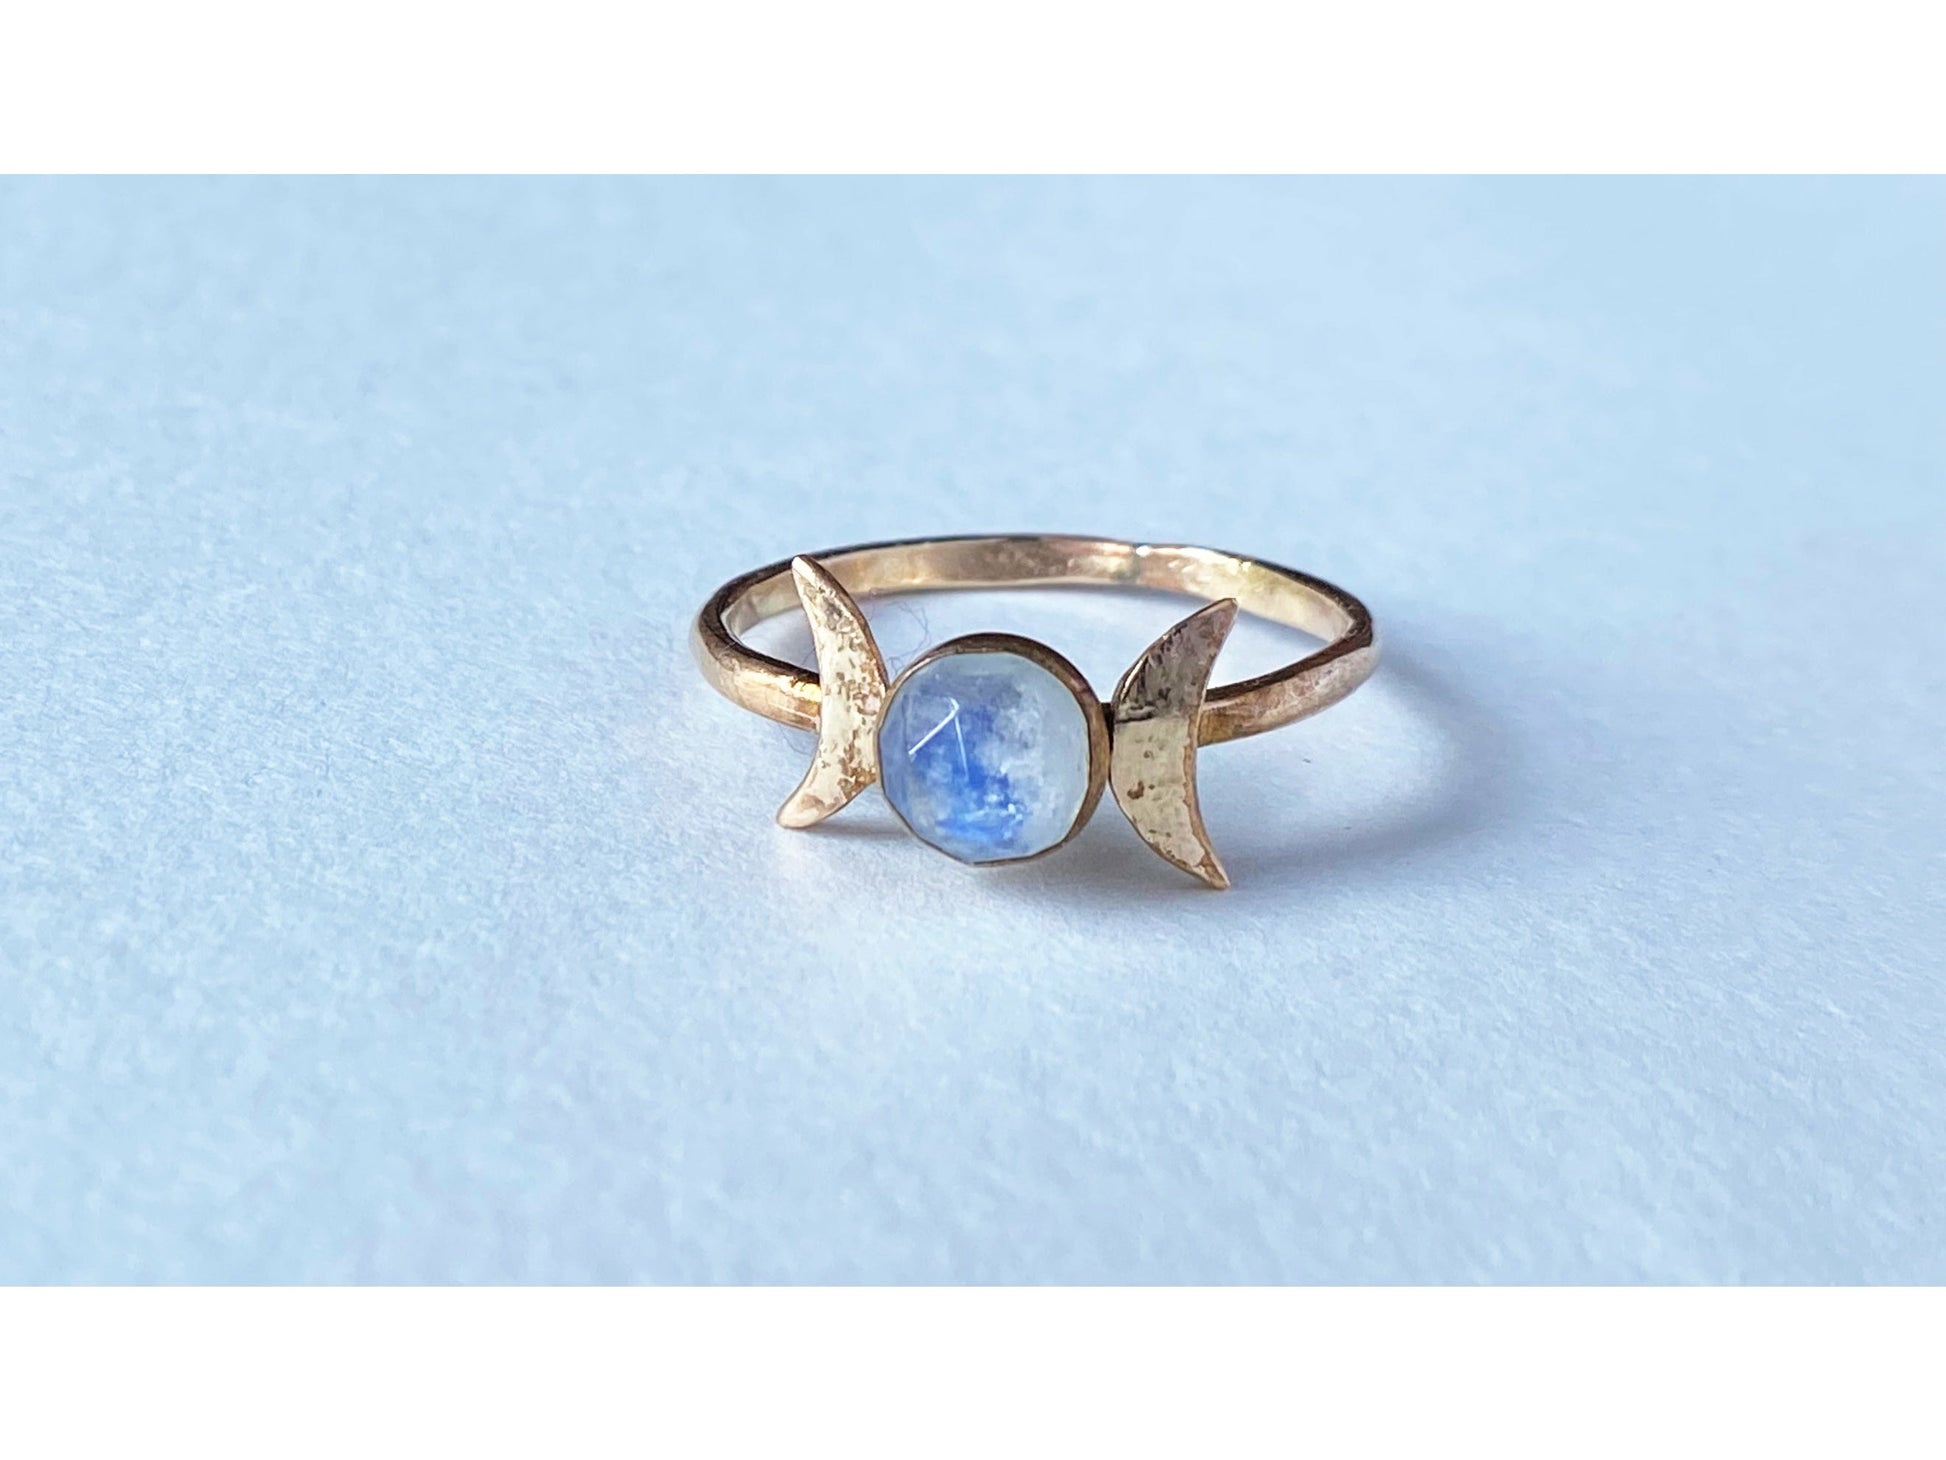 Two moons on the left and right of the stone, moonstone set at focal. Made out of gold filled.